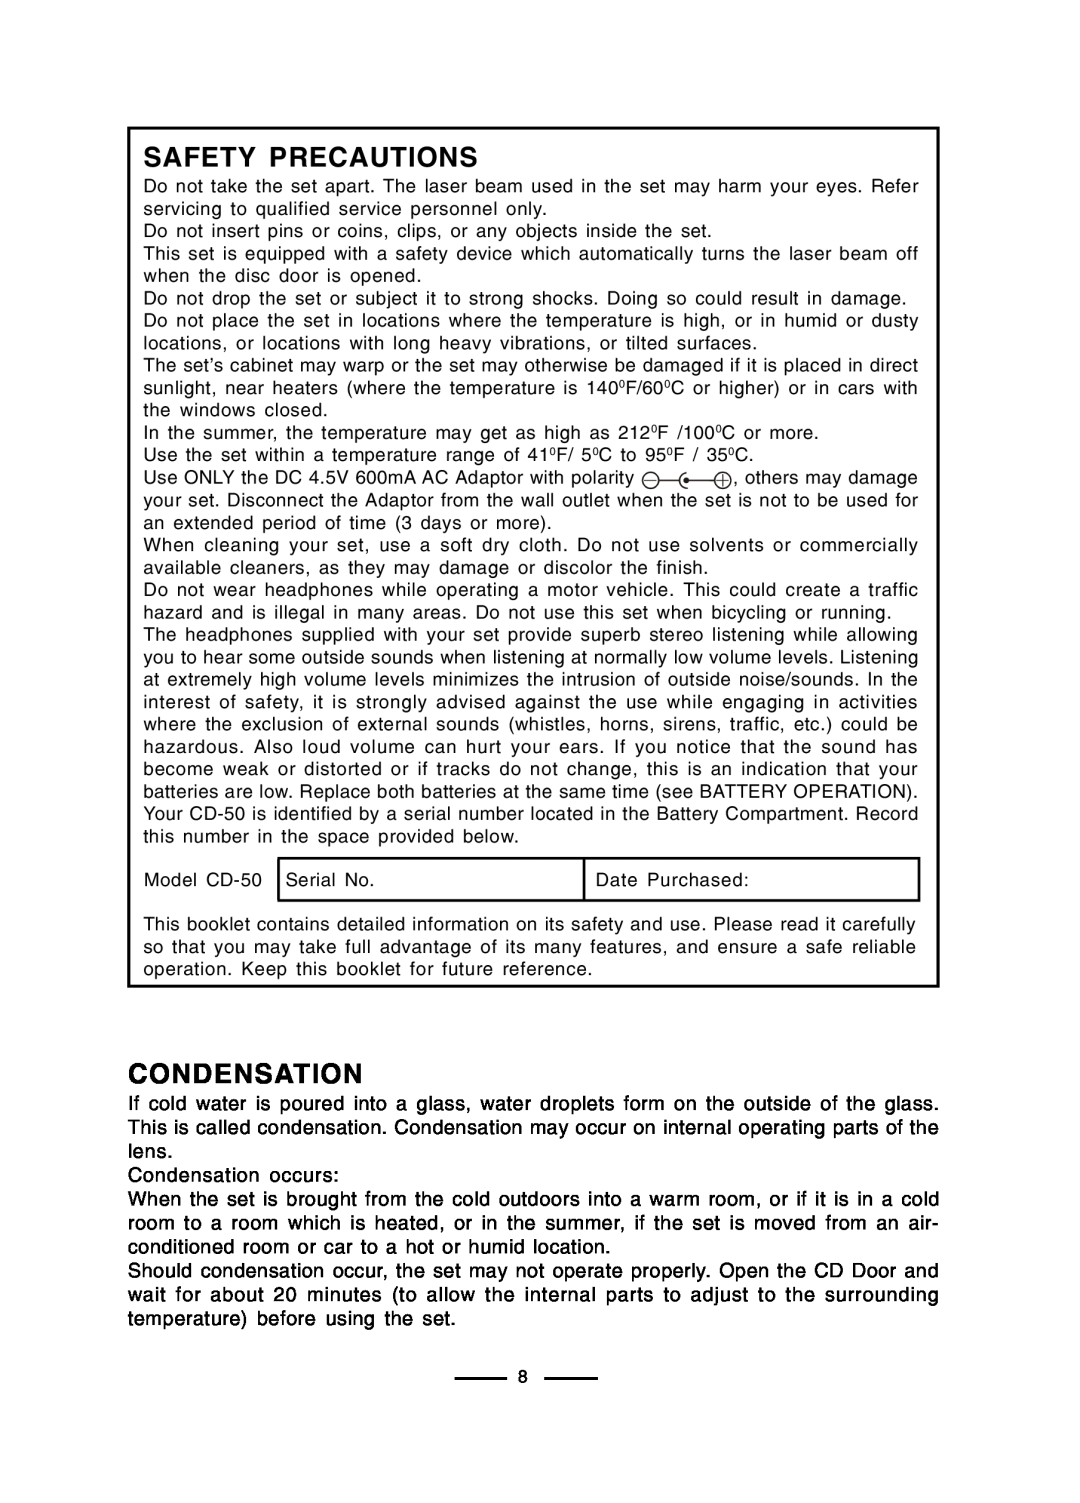 Lenoxx Electronics CD-50 operating instructions Safety Precautions, Condensation 